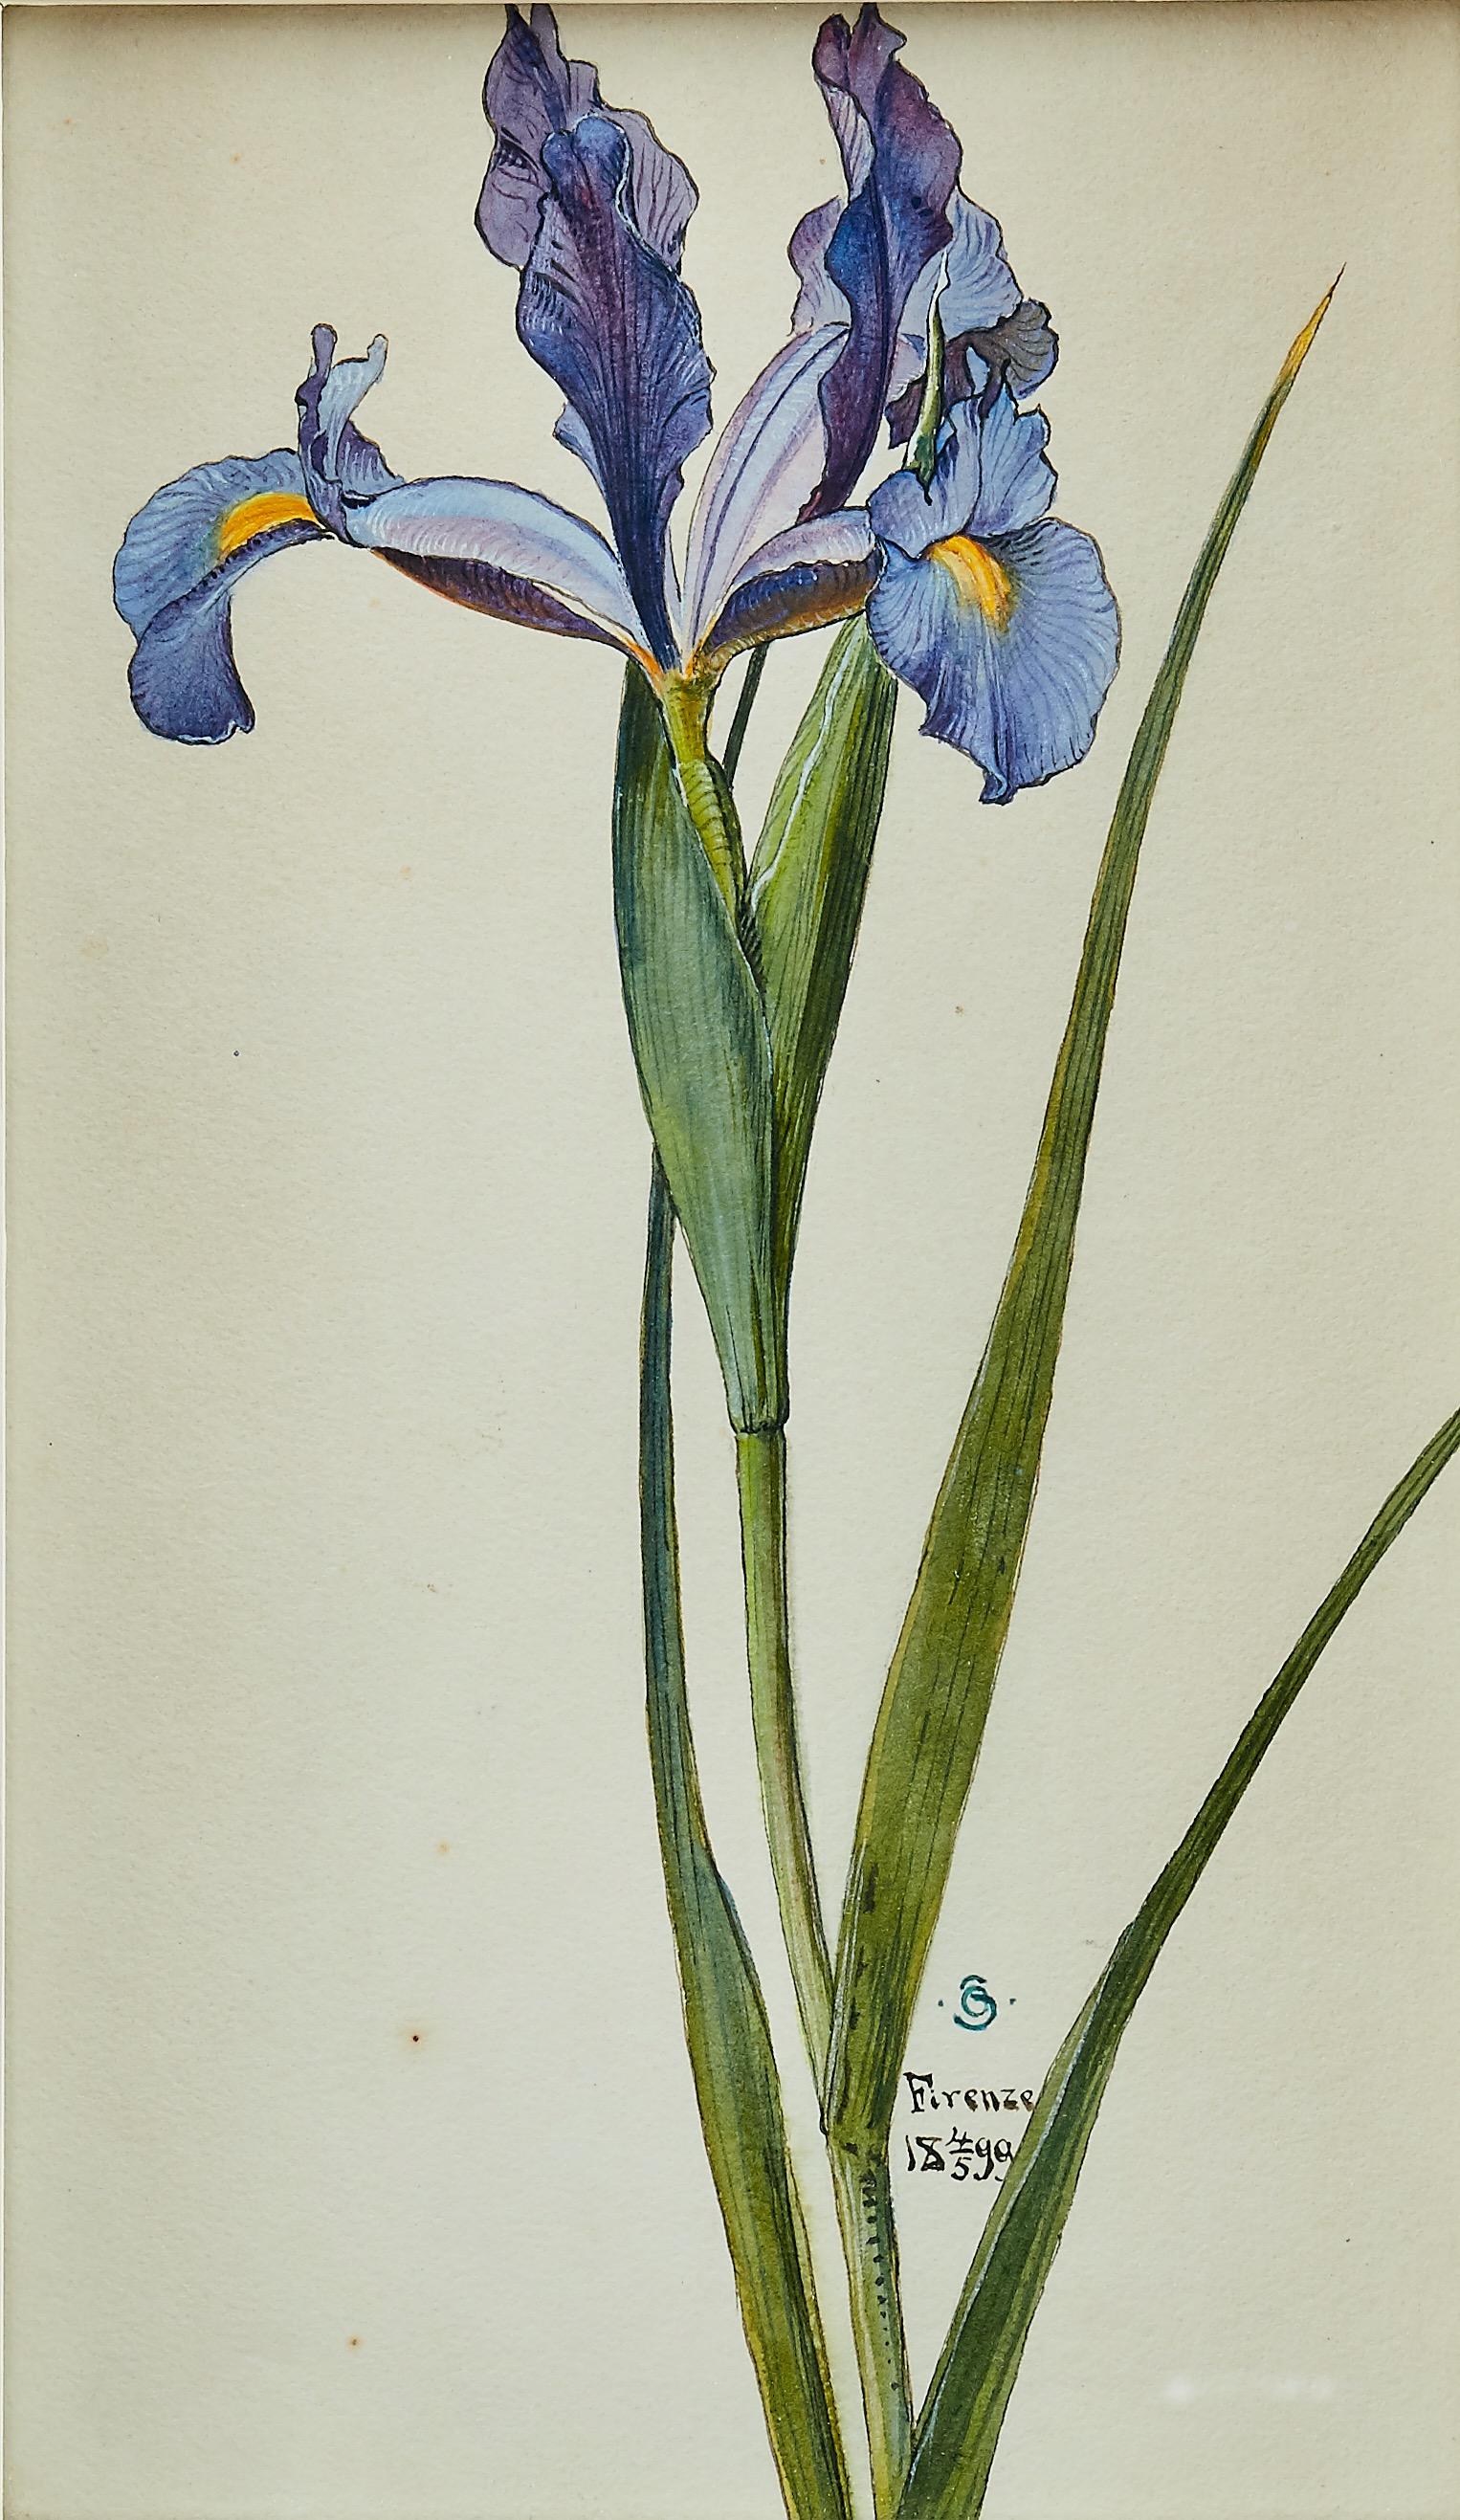 A beautiful watercolor of an Iris painted by Otto Strandman (1871-1960). Signed with monogram 'OS' and dated 'Firenze 1899'. Watercolor and gouache on paper. 

Otto Strandman received his education at the The College of Design and Crafts school in